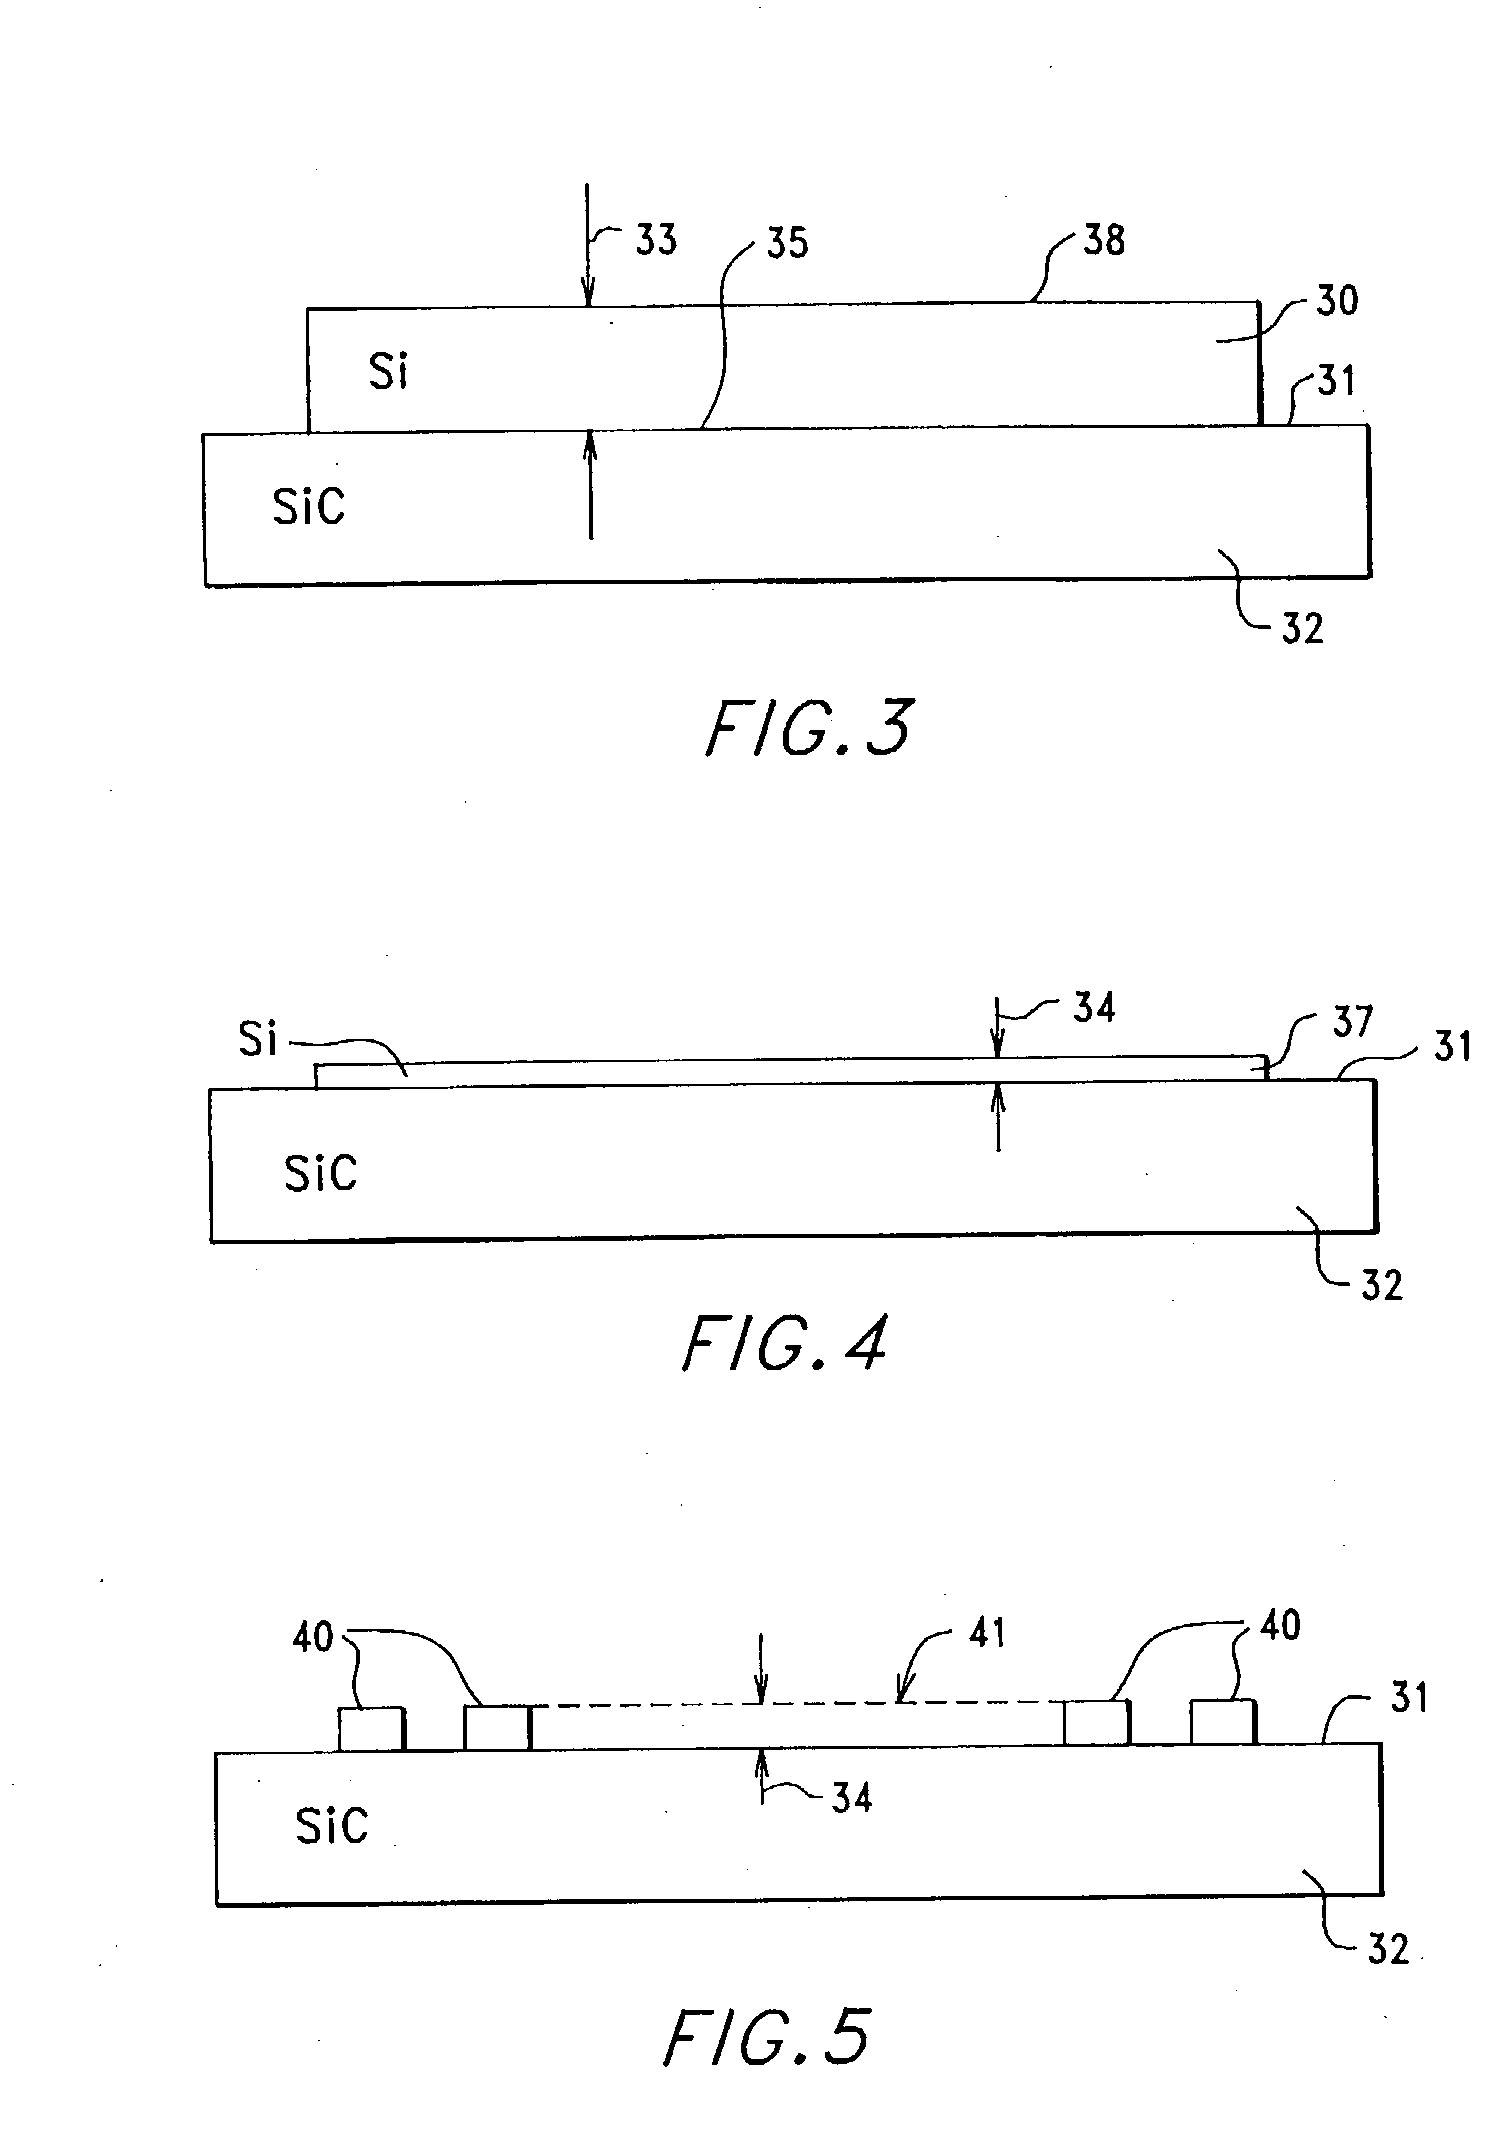 Double heterojunction light emitting diodes and laser diodes having quantum dot silicon light emitters